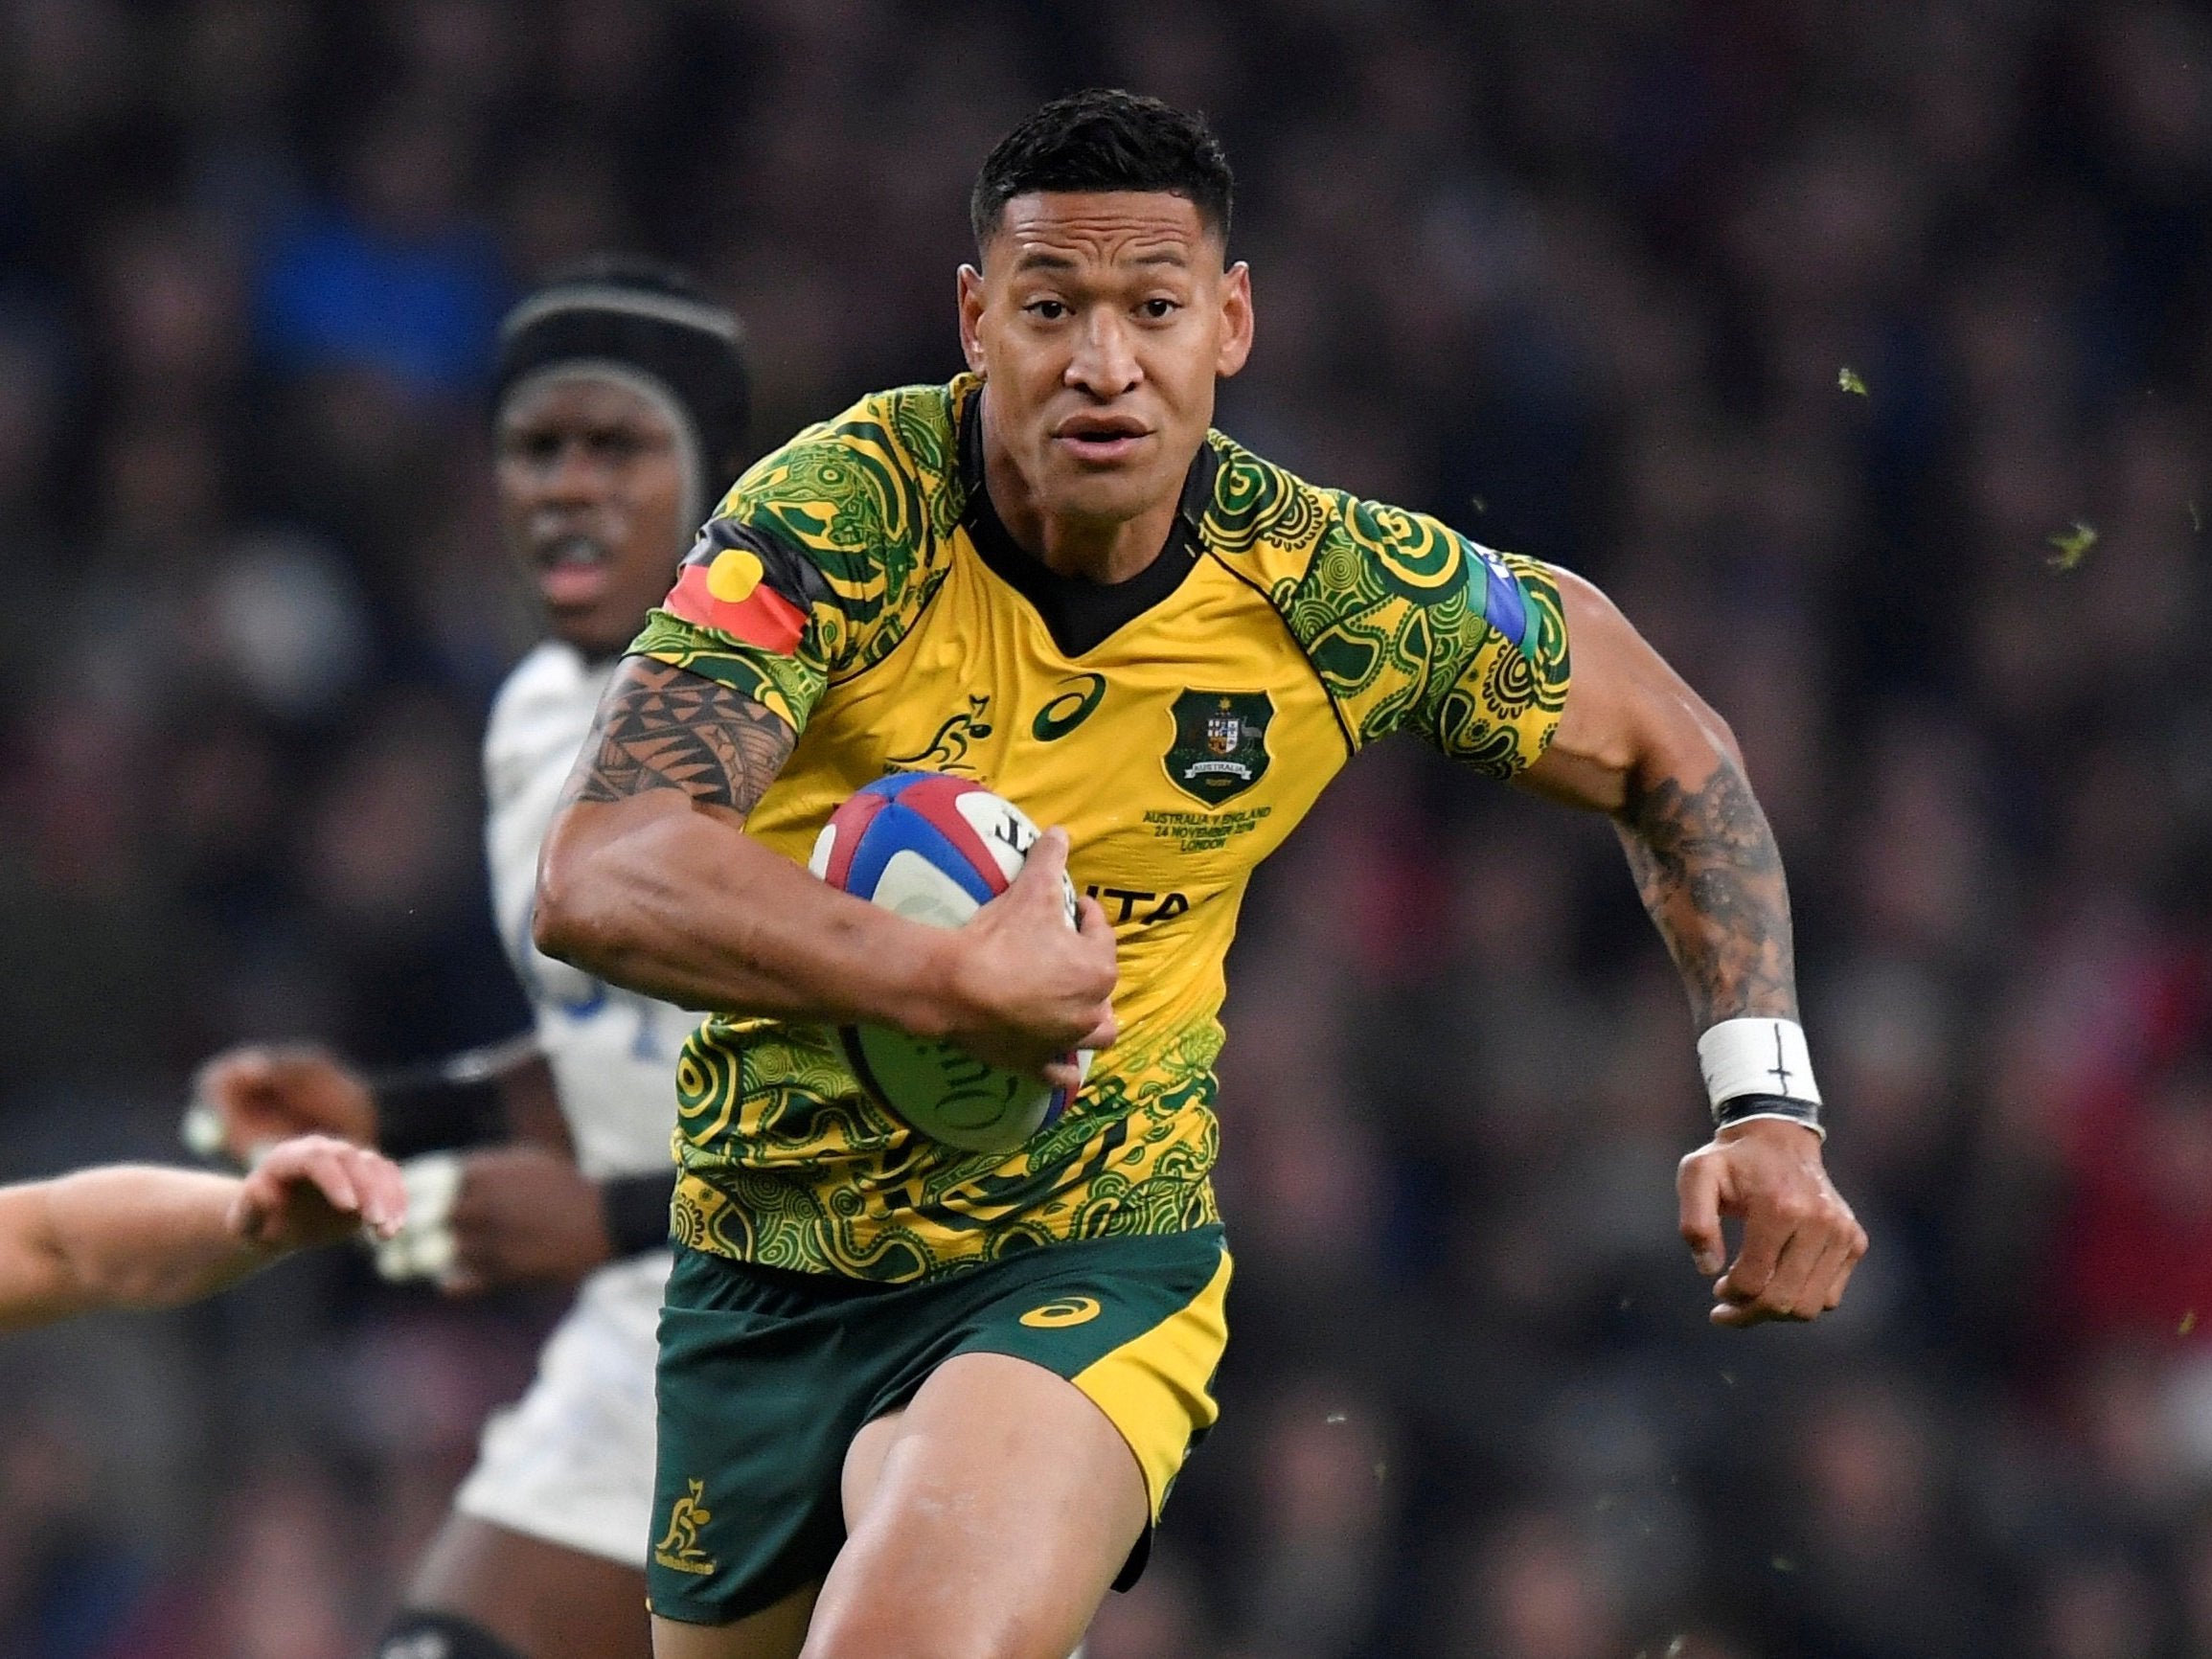 Israel Folau has been sacked by Rugby Australia